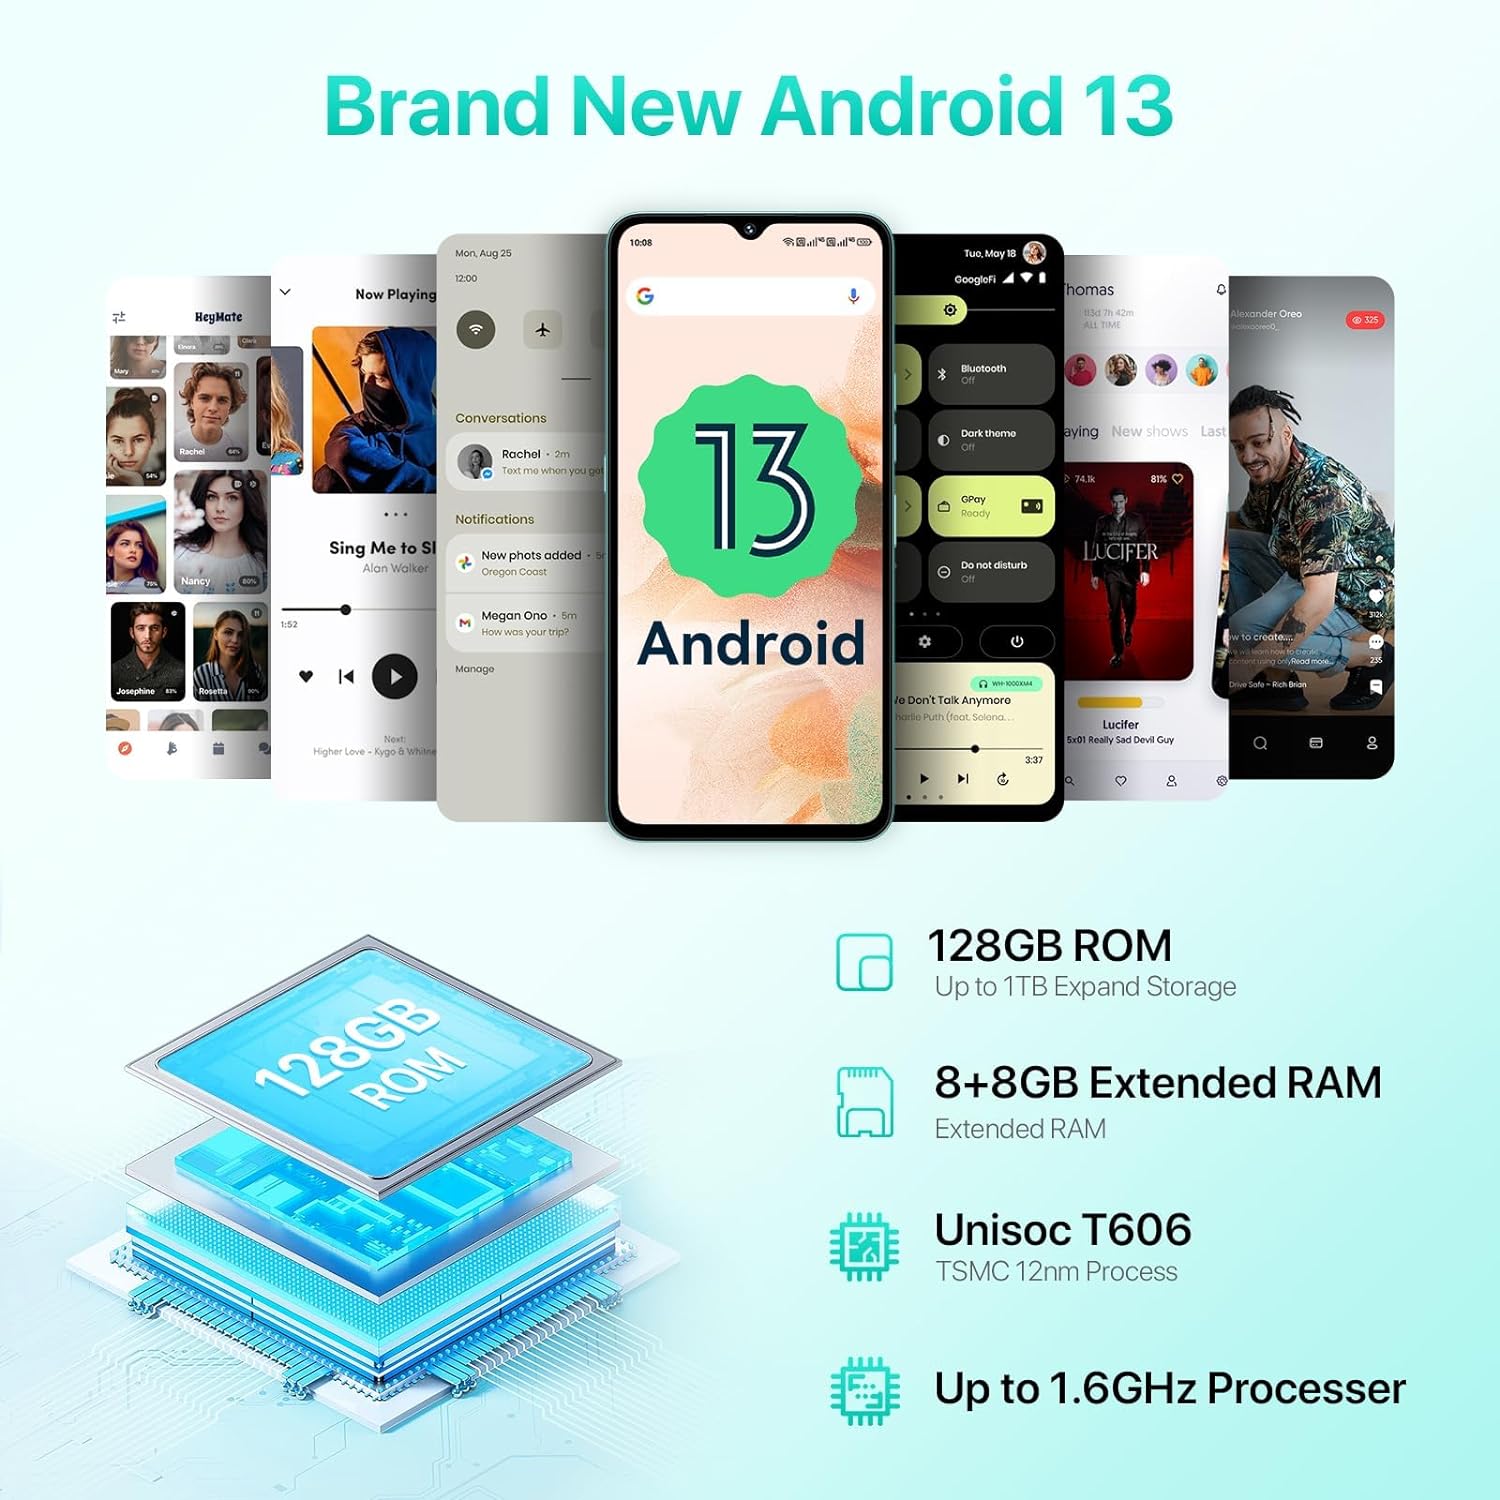 UMIDIGI A15C NFC Mobile Phone,16GB+128GB/1TB,Unisoc T606 Octa - Core Cellphone,Android 13 Smartphone,48MP Camera,5000mAh Battery Type - C,6.7HD+Screen,4G Dual SIM/Face ID/GPS/OTG(Black)   Import  Single ASIN  Import  Multiple ASIN ×Product customizat - Amazing Gadgets Outlet